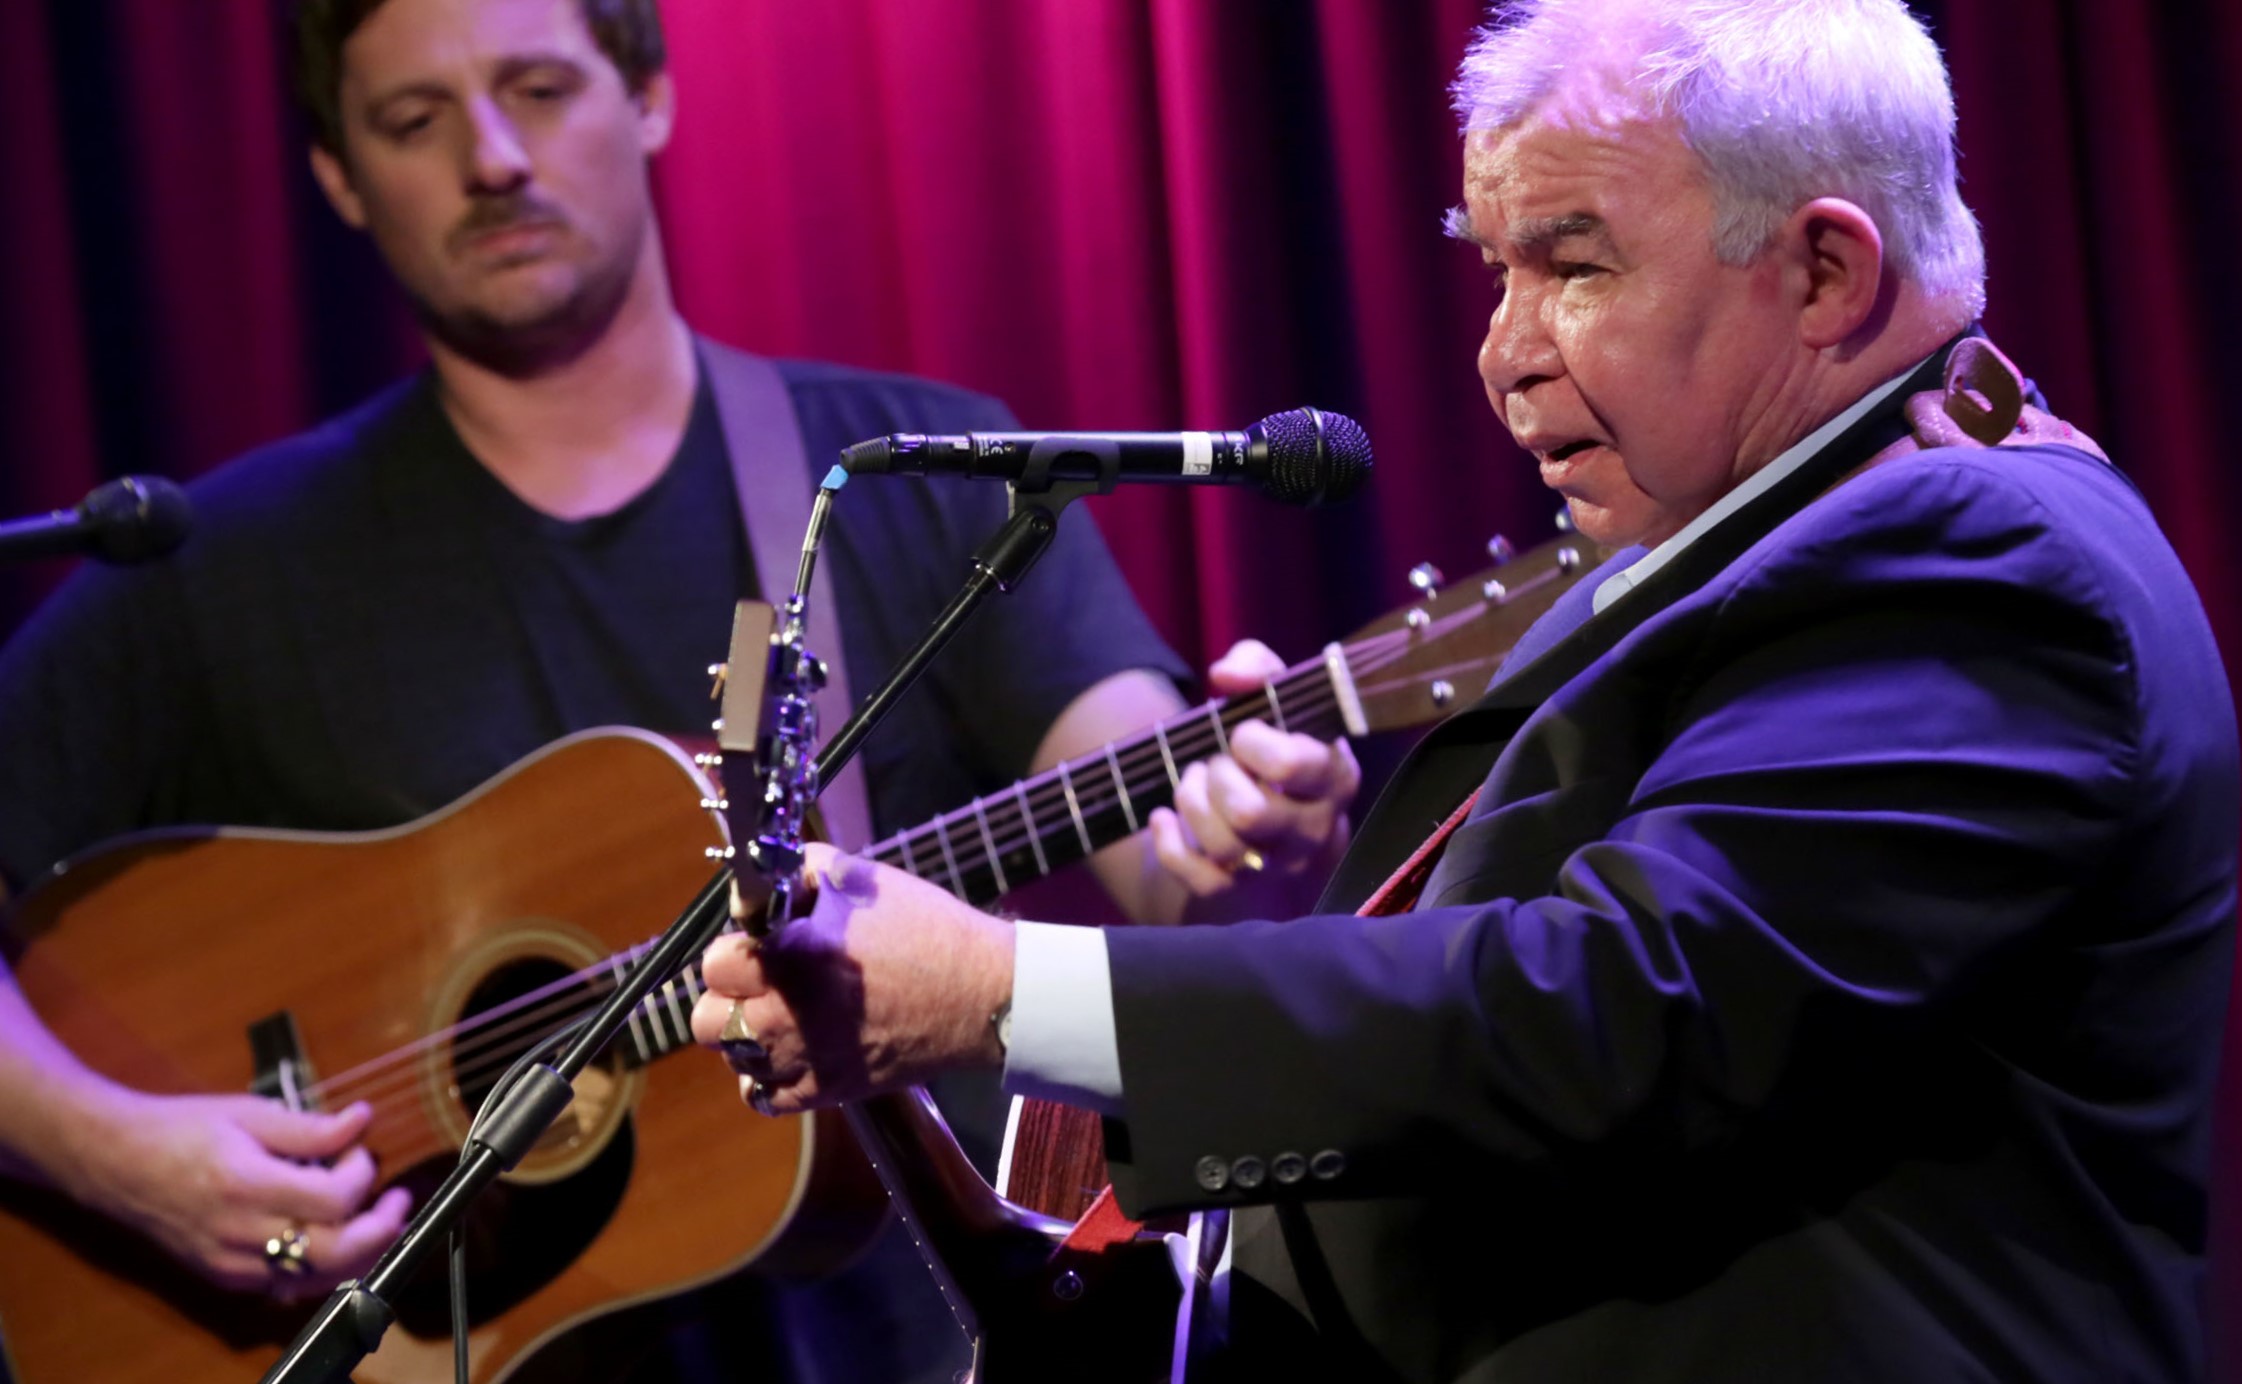 John Prine & Sturgill Simpson, Live Interview at the Grammy Museum